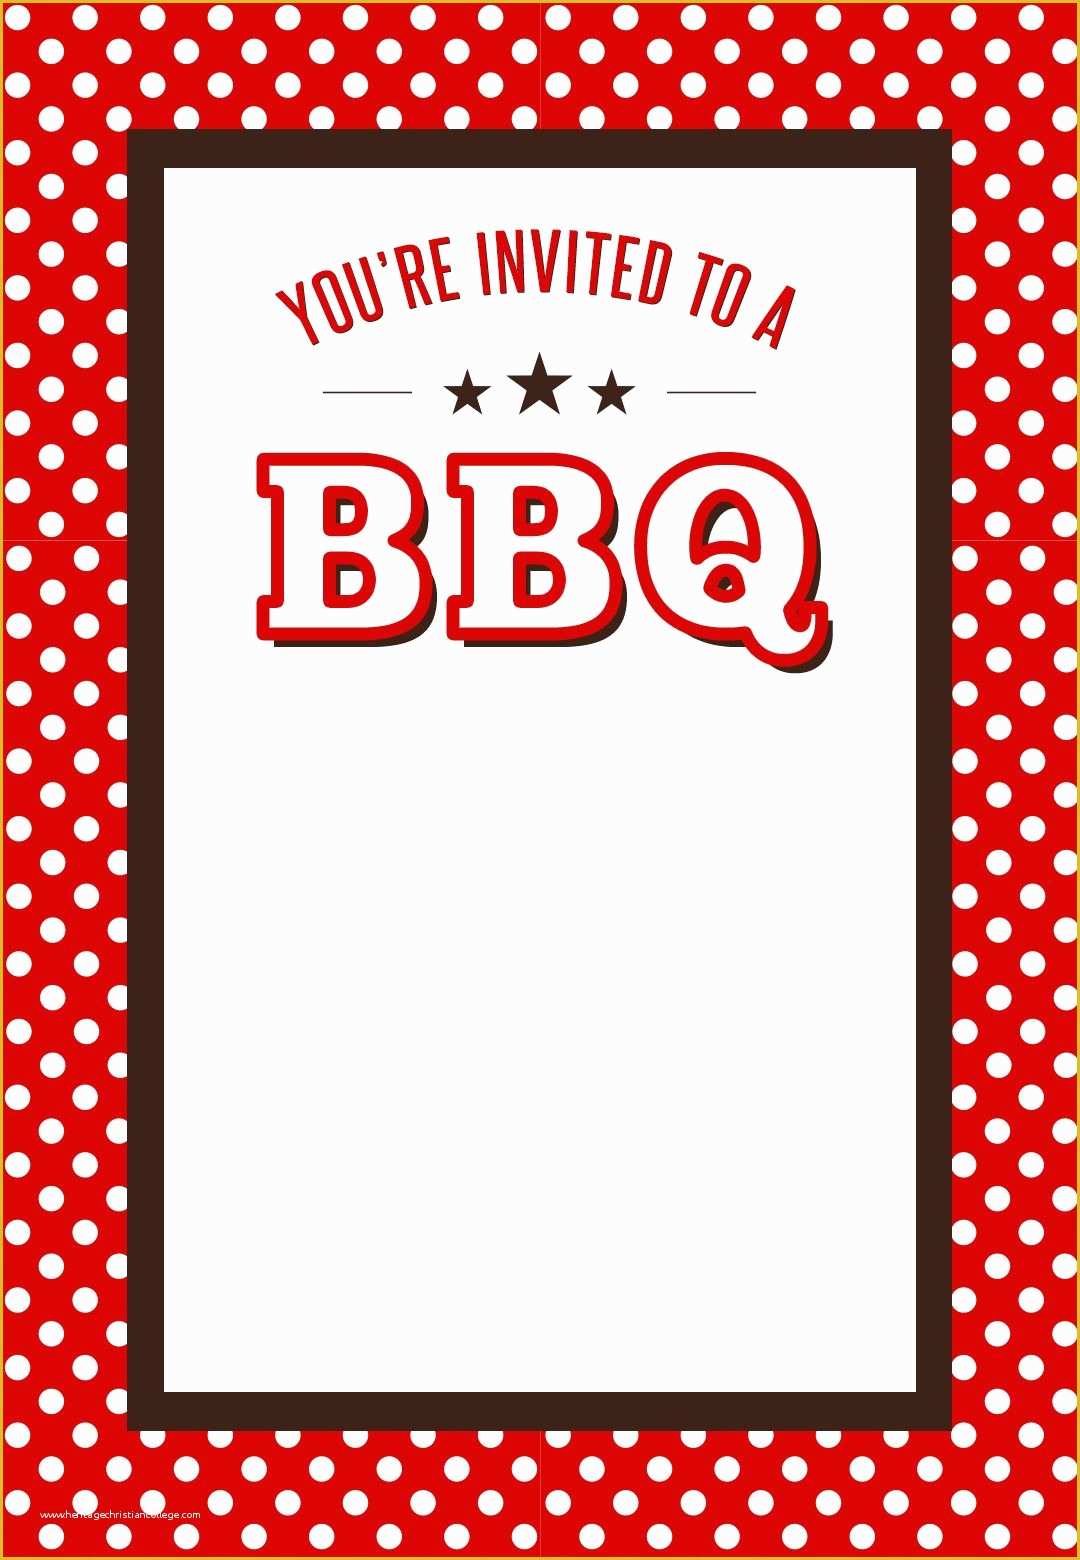 Free Downloadable Bbq Invitation Template Of 12 Best S Of Summer Bbq 